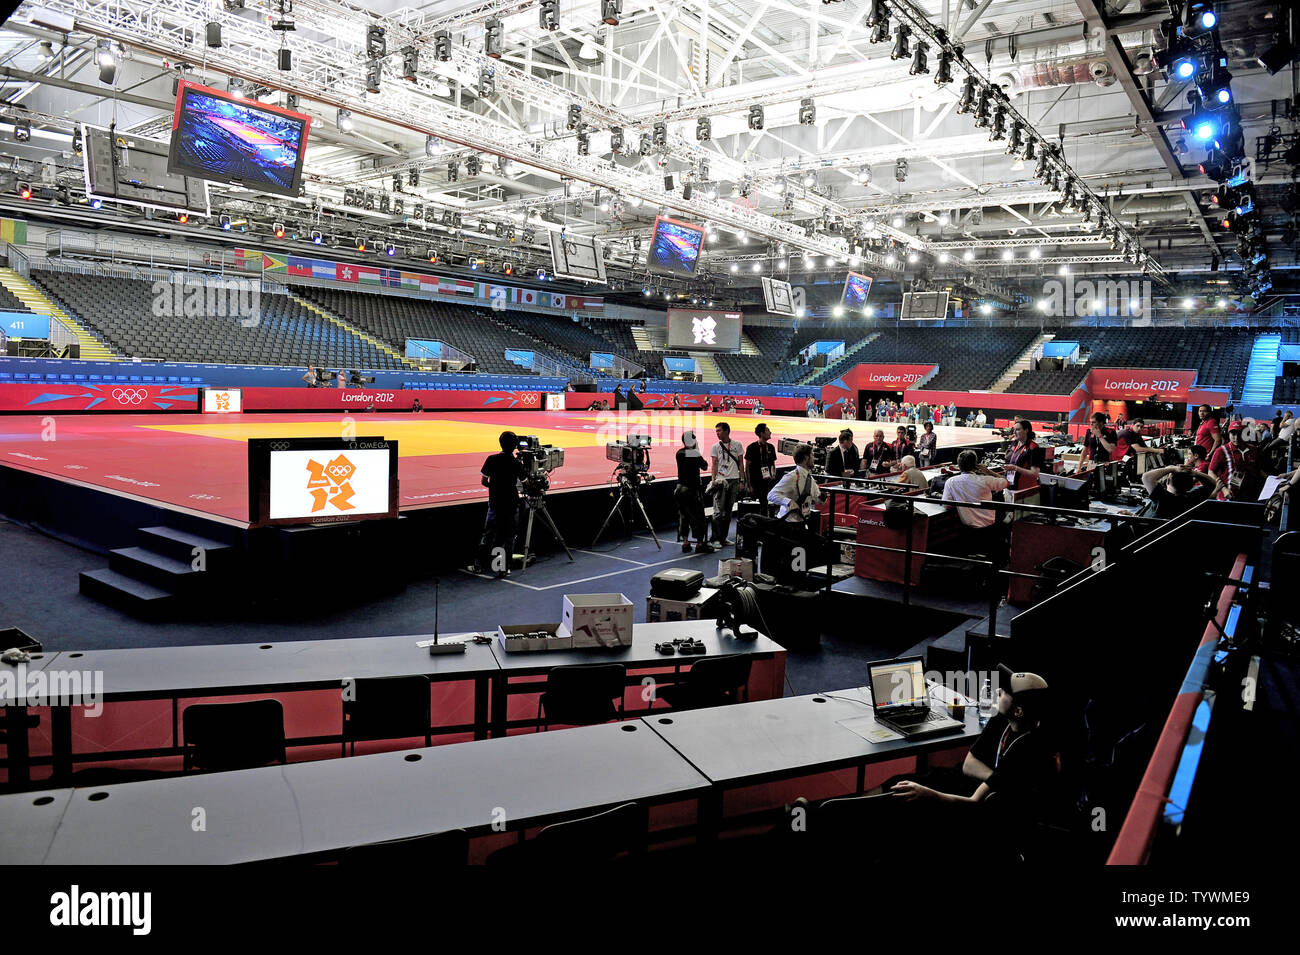 General view of the Judo arena at ExCel exhibition center prior to the Summer Olympics in London on July 26, 2012.   UPI/Ron Sachs Stock Photo